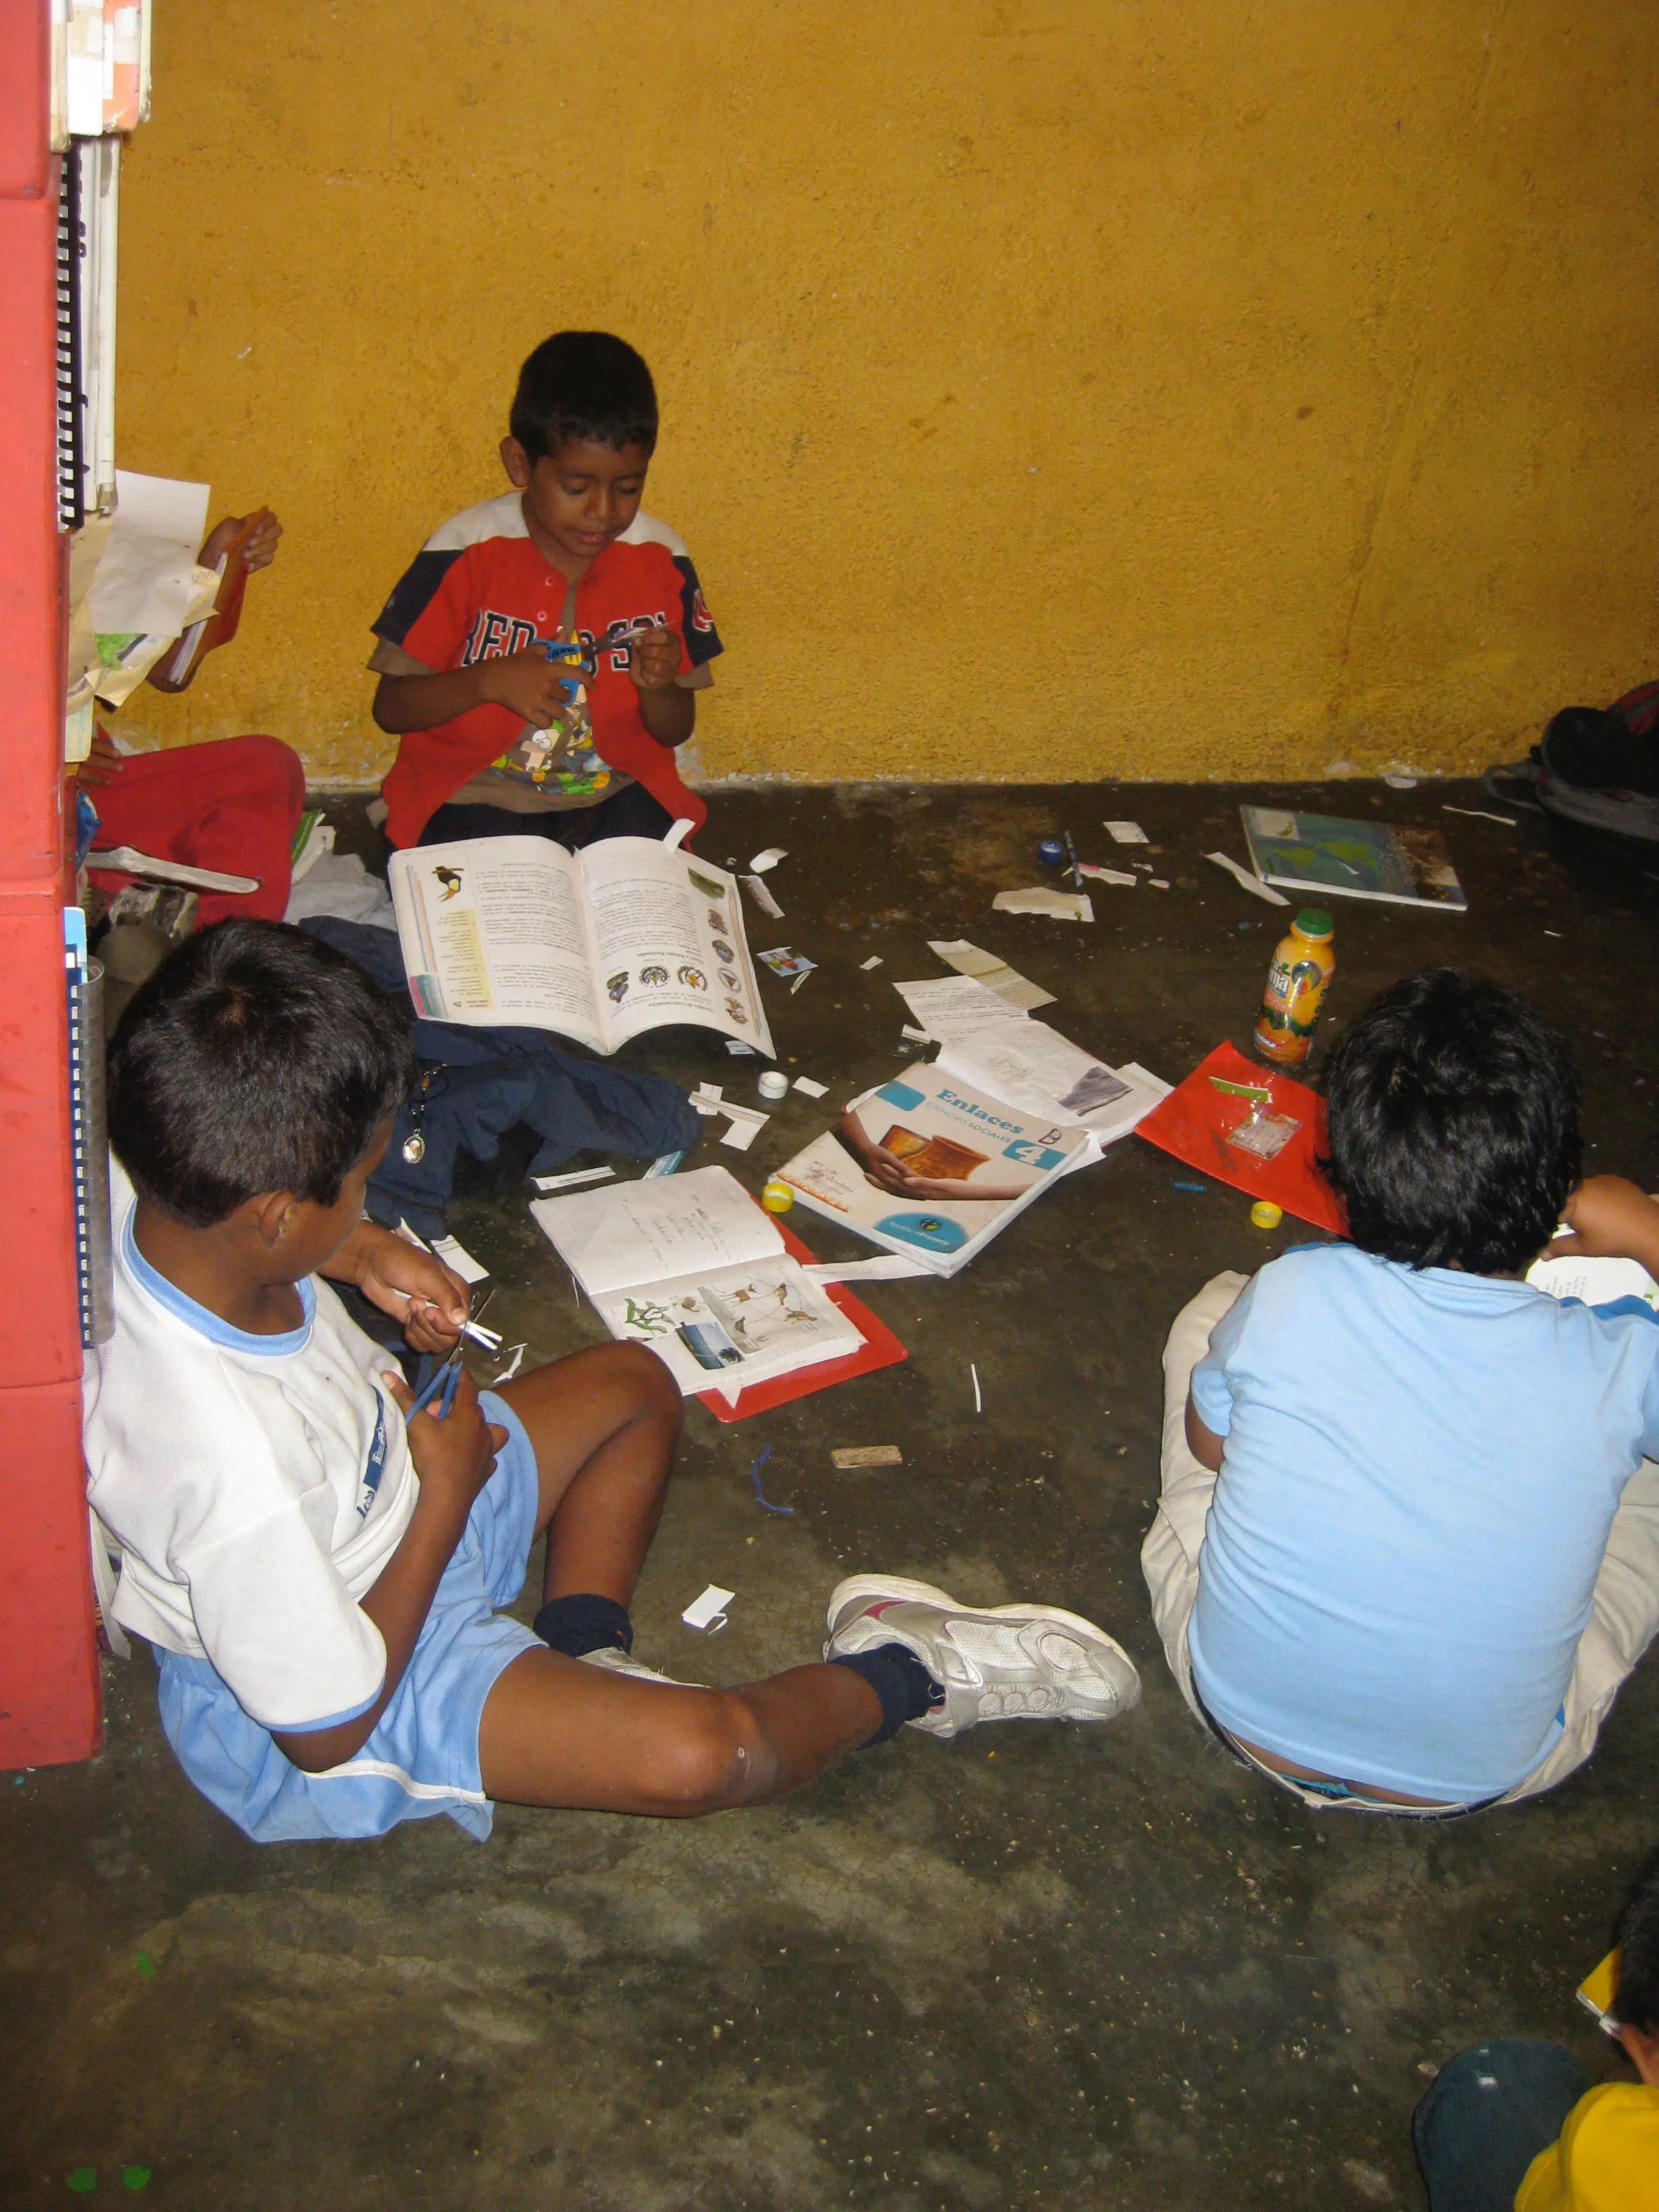 Students studying at the after school club on study and service project